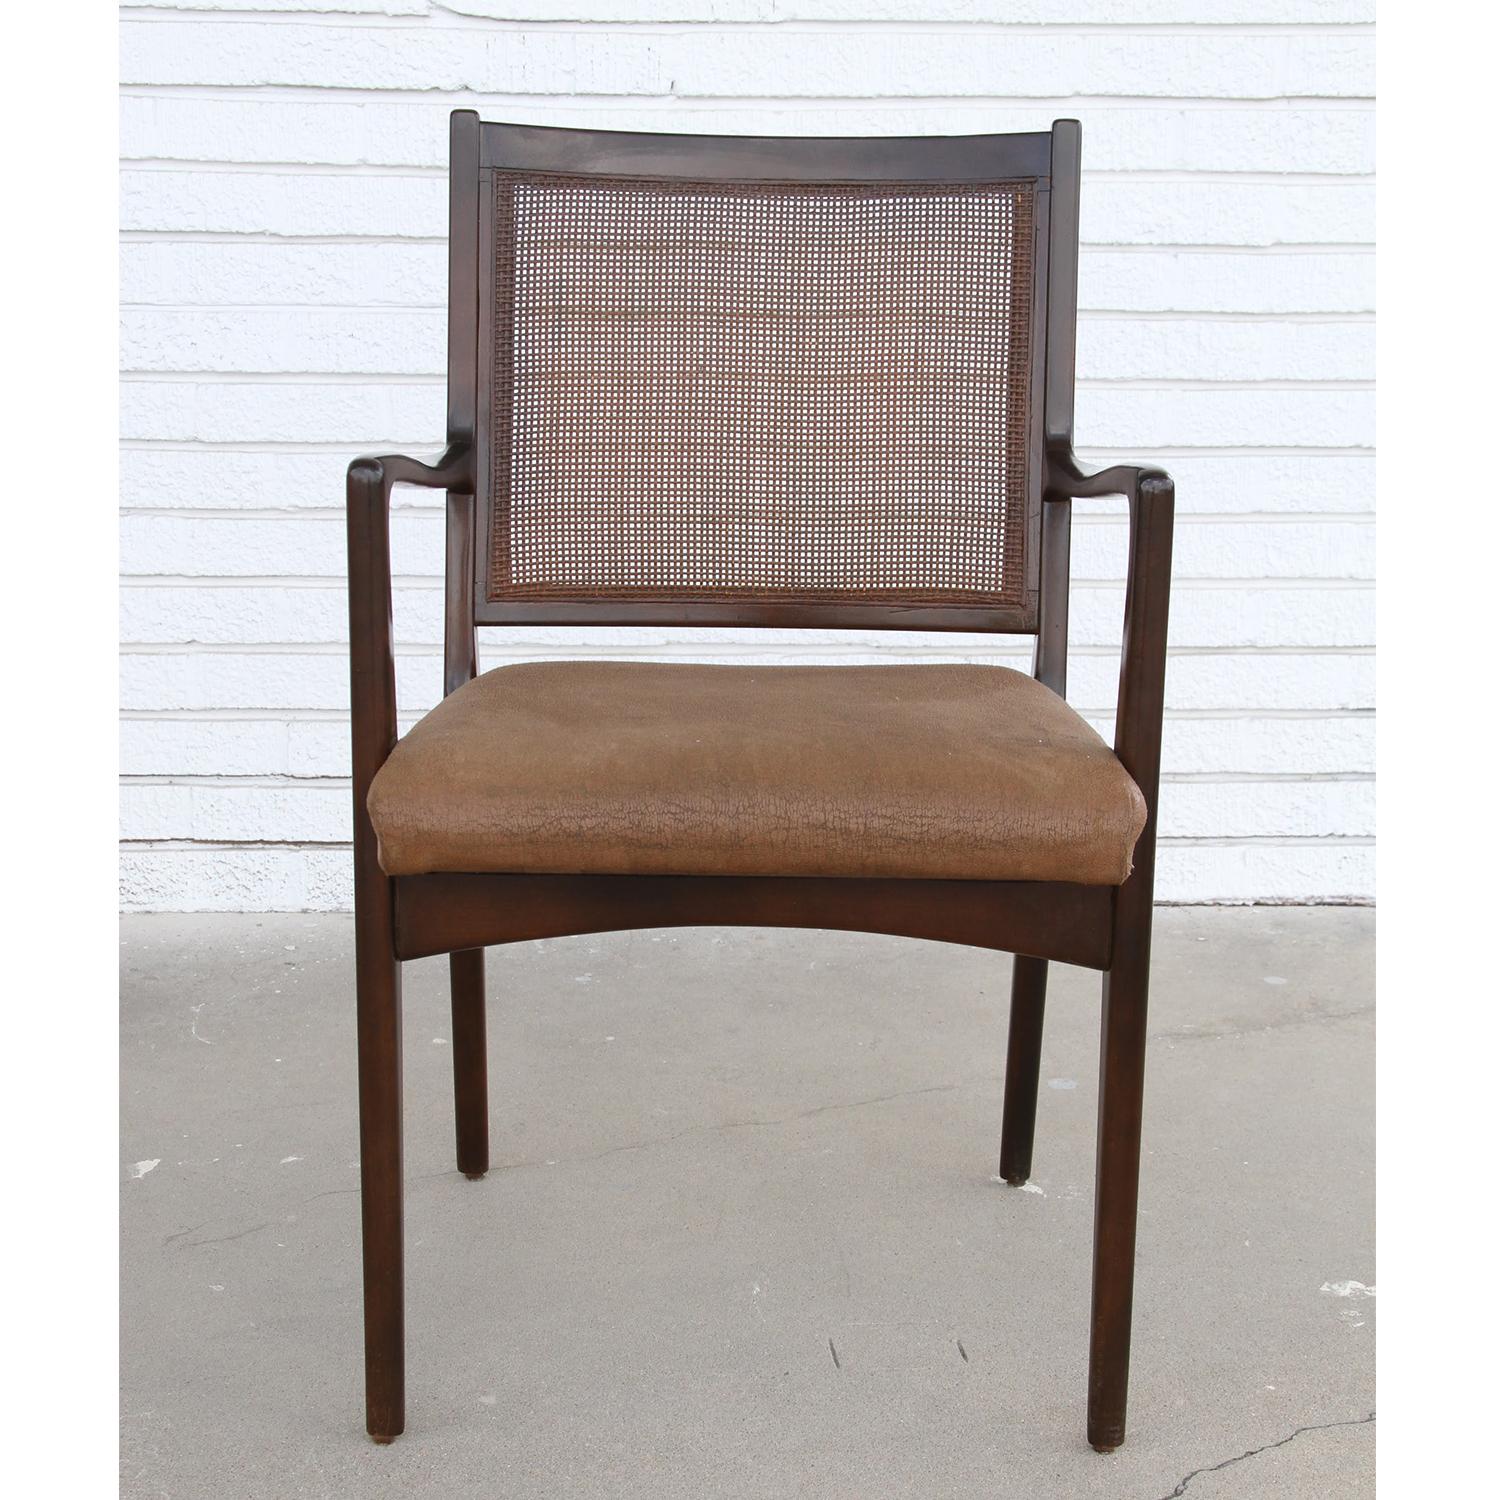 Set of 6 Swedish dining chairs Attributed to Karl Erik Ekselius in teak and cane

Karl-Erik Ekselius (1914-1998) was trained as a cabinet maker and was a student of Carl Malmsten. His designs are invested in modern Danish design of the time yet also